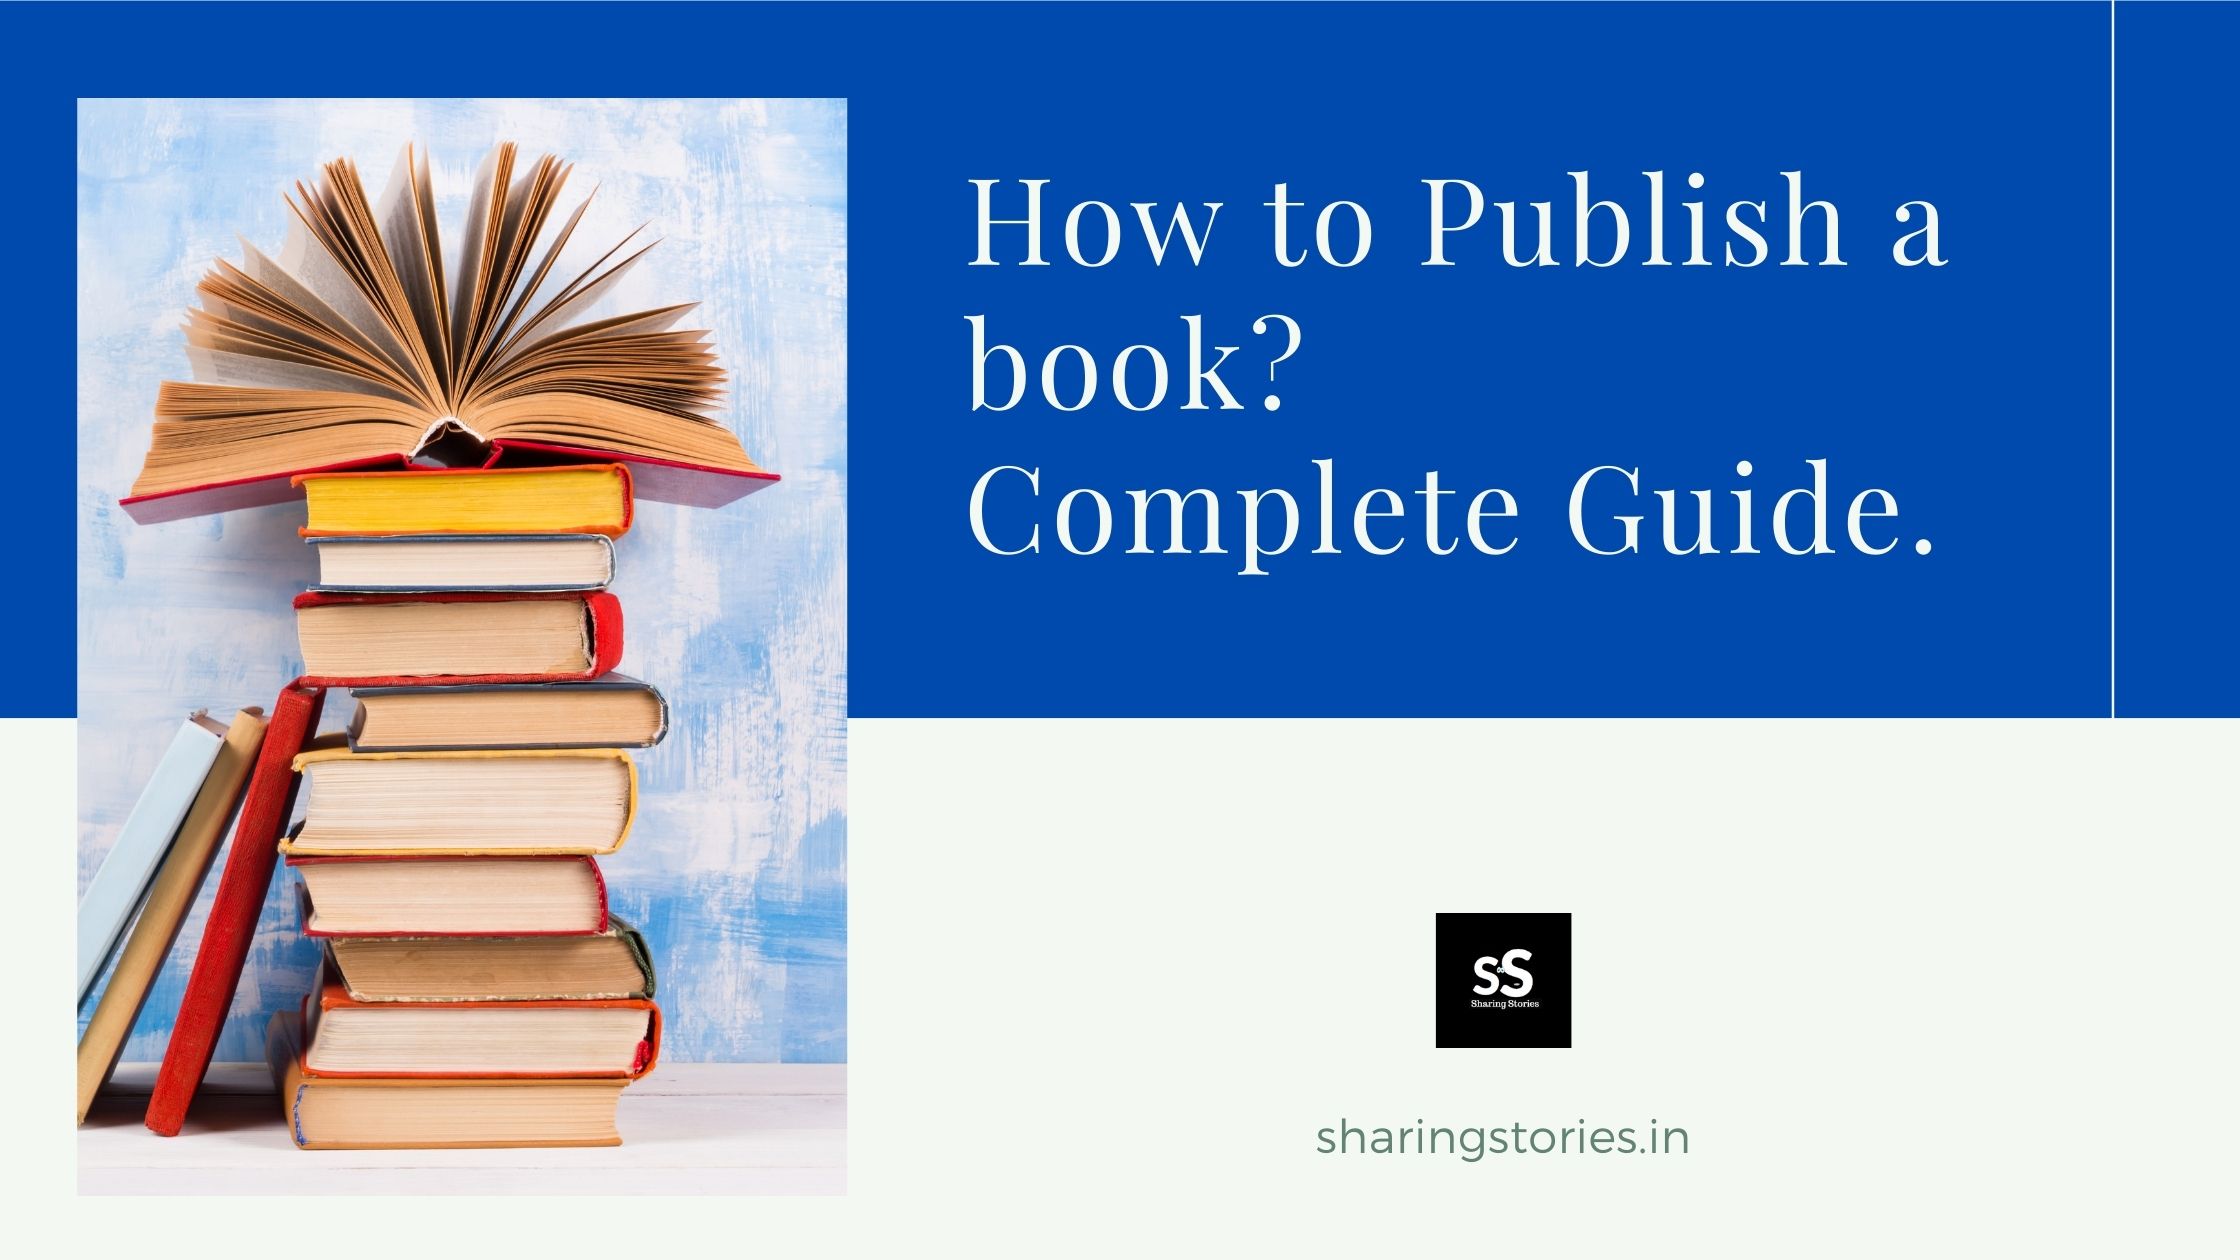 What S The Best Way To Self Publish An E Book On Social Media Business Self Help Quora